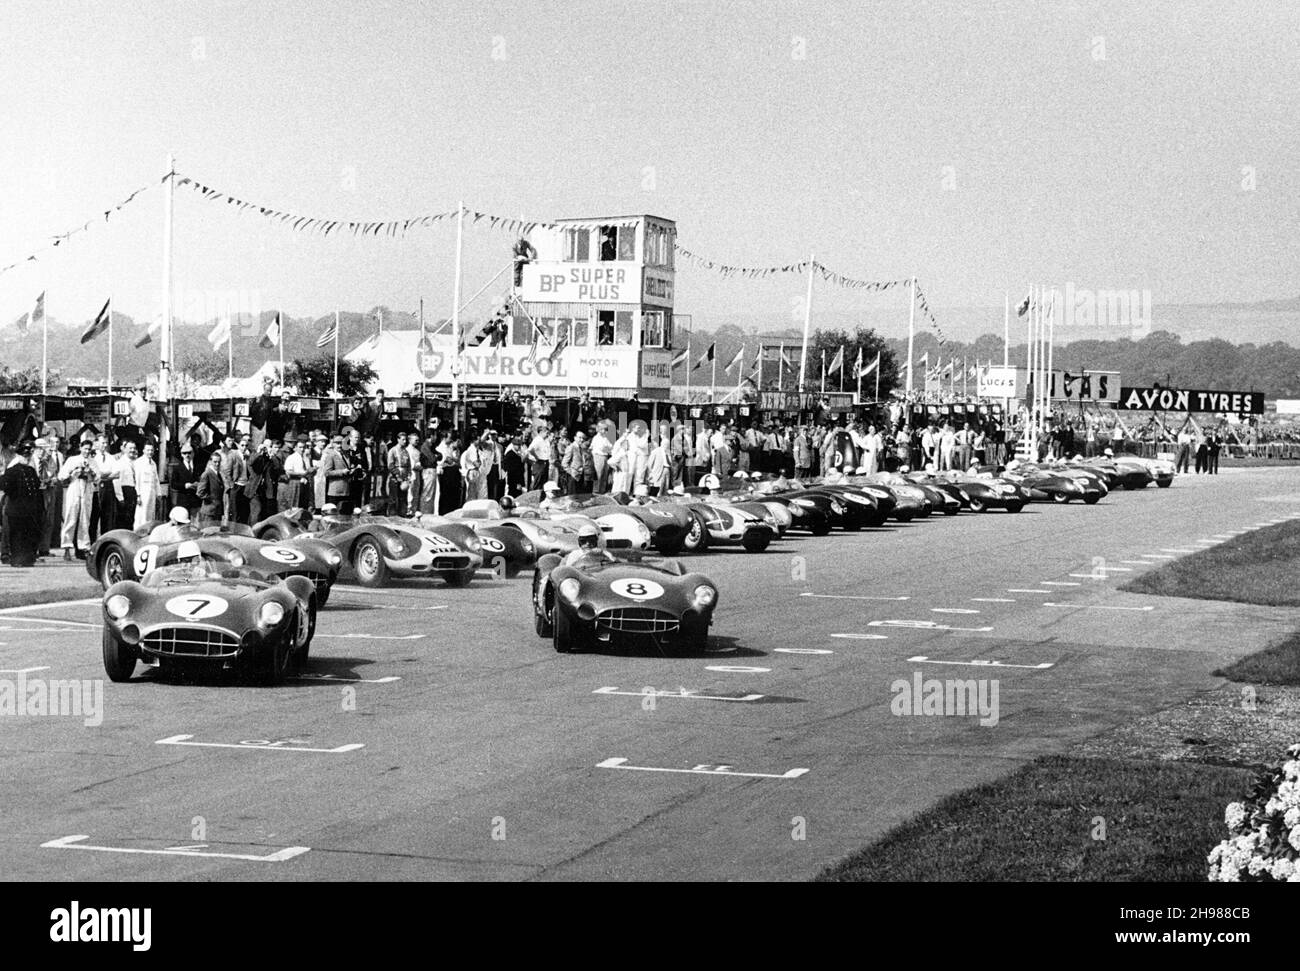 Start of the RAC Tourist Trophy race, Goodwood, Sussex, 1958. Stirling Moss leads the way in the Aston Martin that he and teammate Tony Brooks drove to victory in the race, followed by the third place finishing Aston Martin of Carroll Shelby and Stuart Lewis-Evans. Stock Photo